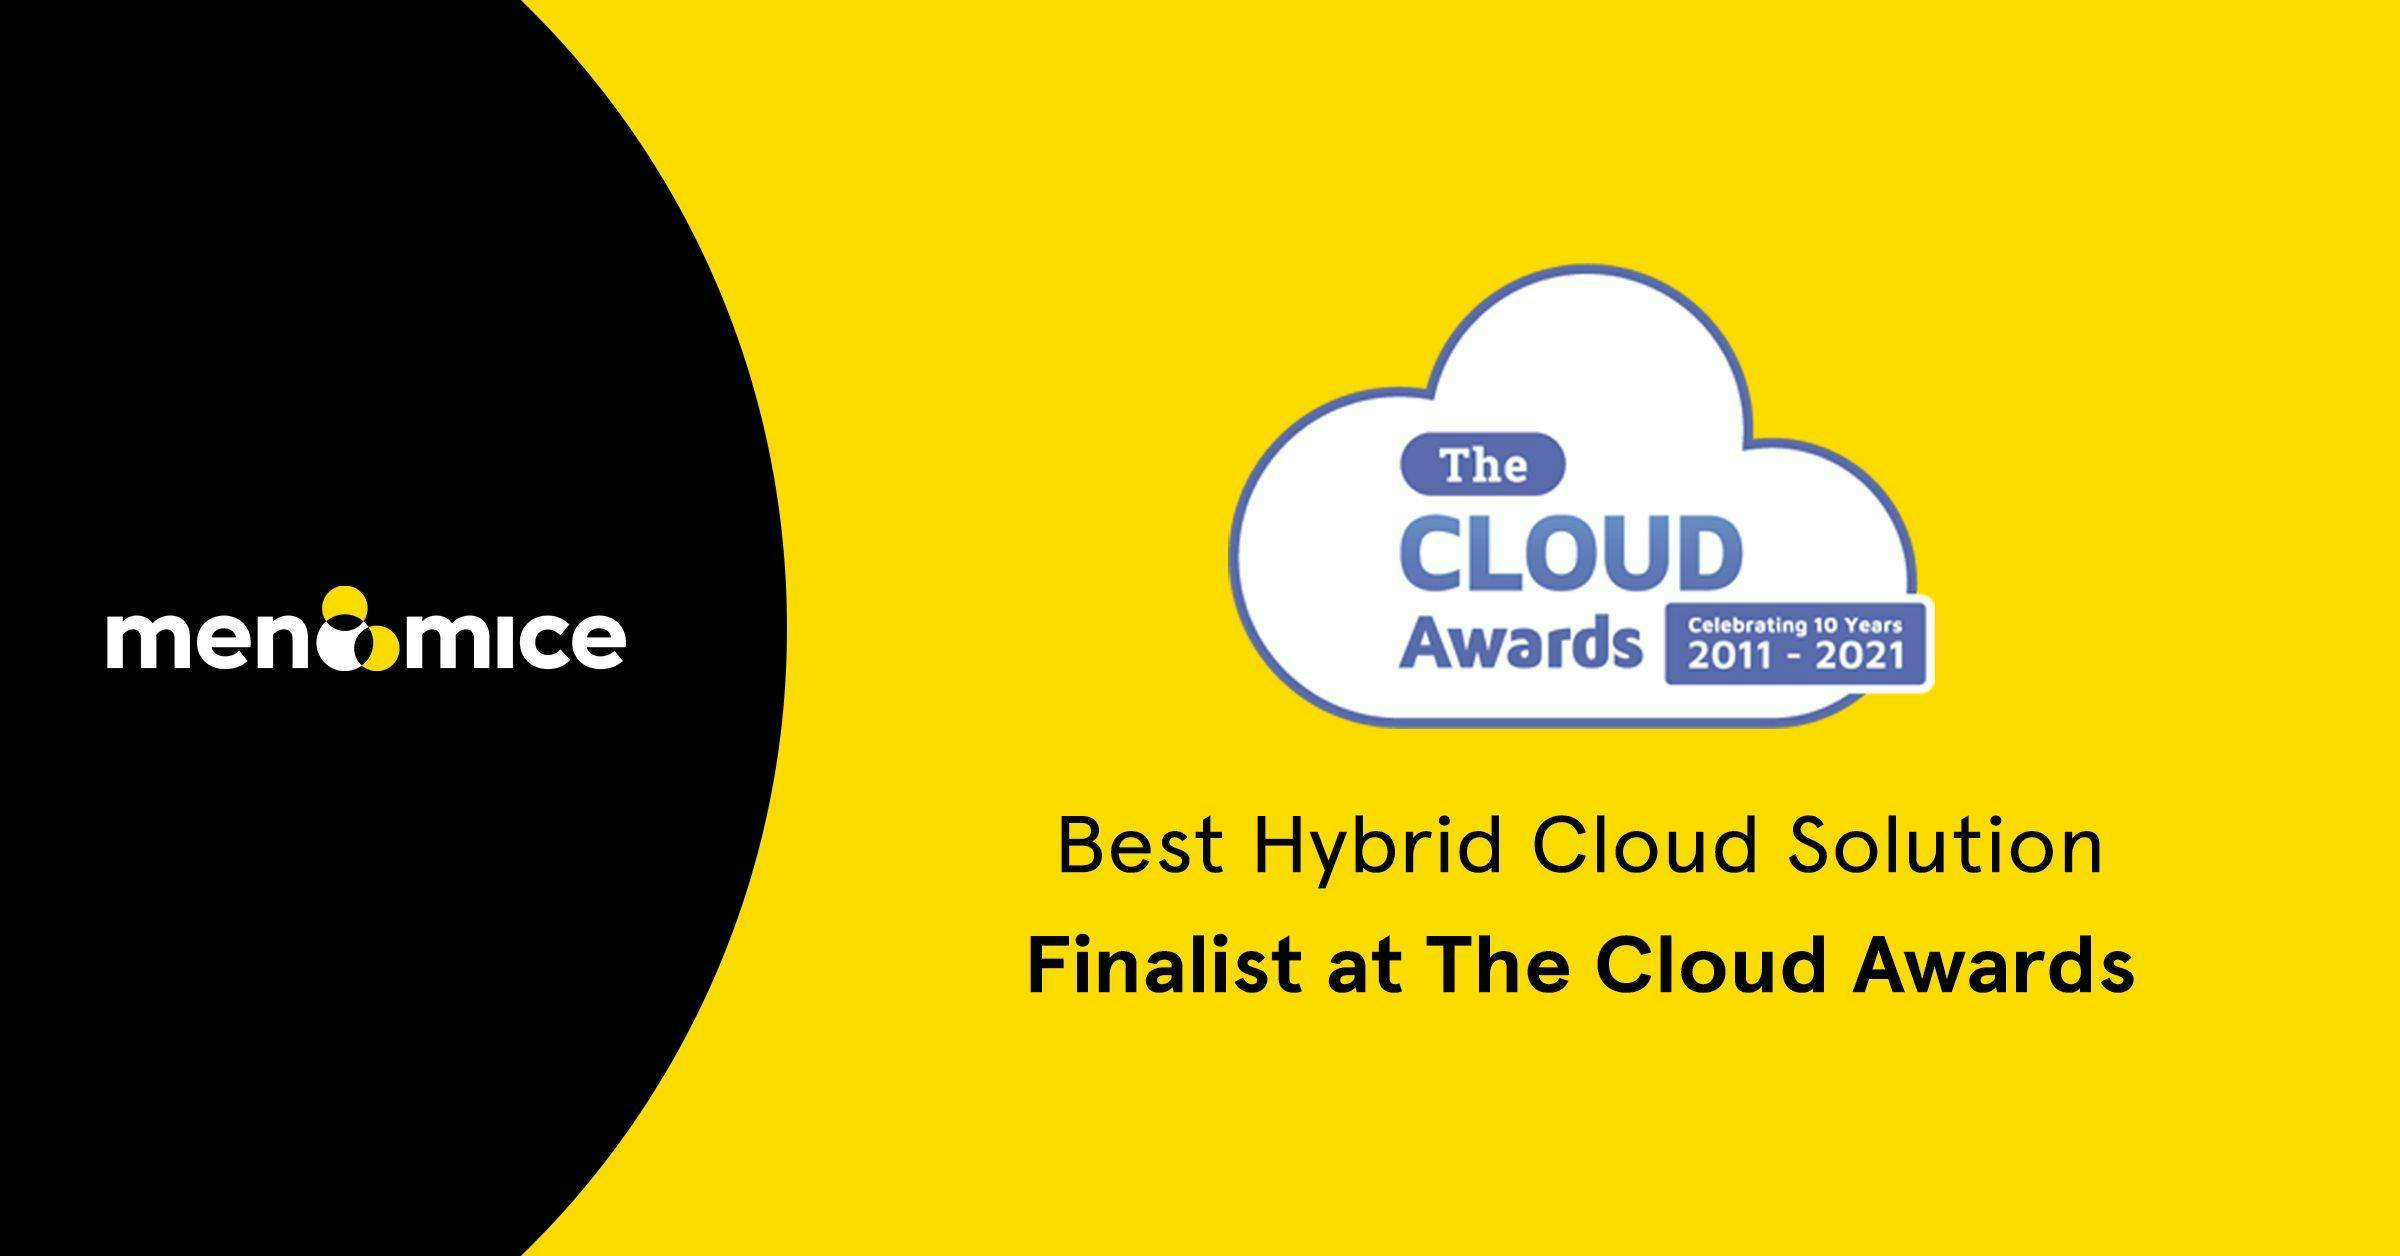 Finalist at the Cloud Awards for Hybrid Cloud Solution